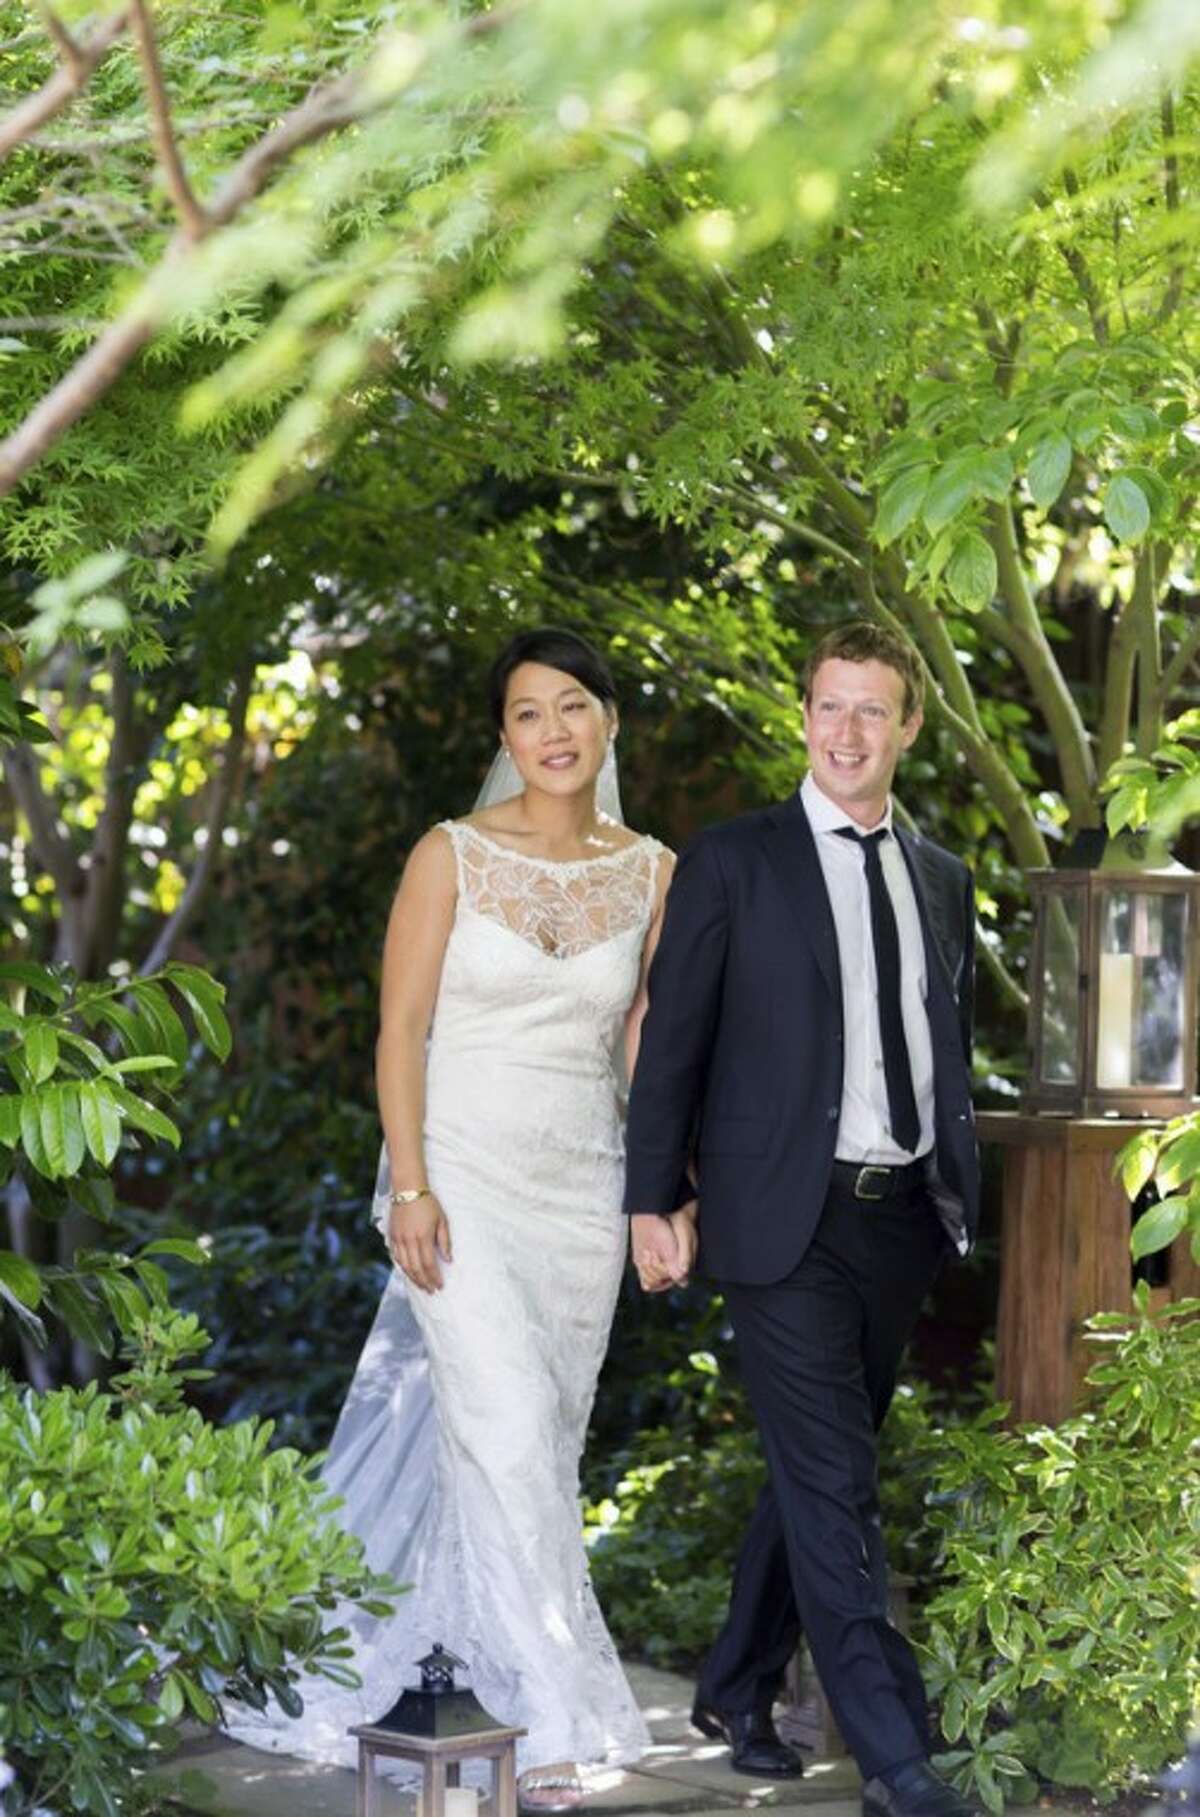 This photo provided by Facebook shows Facebook founder and CEO Mark Zuckerberg and Priscilla Chan at their wedding ceremony in Palo Alto, Calif., Saturday, May 19, 2012. Zuckerberg updated his status to "married" on Saturday. The ceremony took place in Zuckerberg's backyard before fewer than 100 guests, who all thought they were there to celebrate Chan's graduation. (AP Photo/Facebook, Allyson Magda Photography)